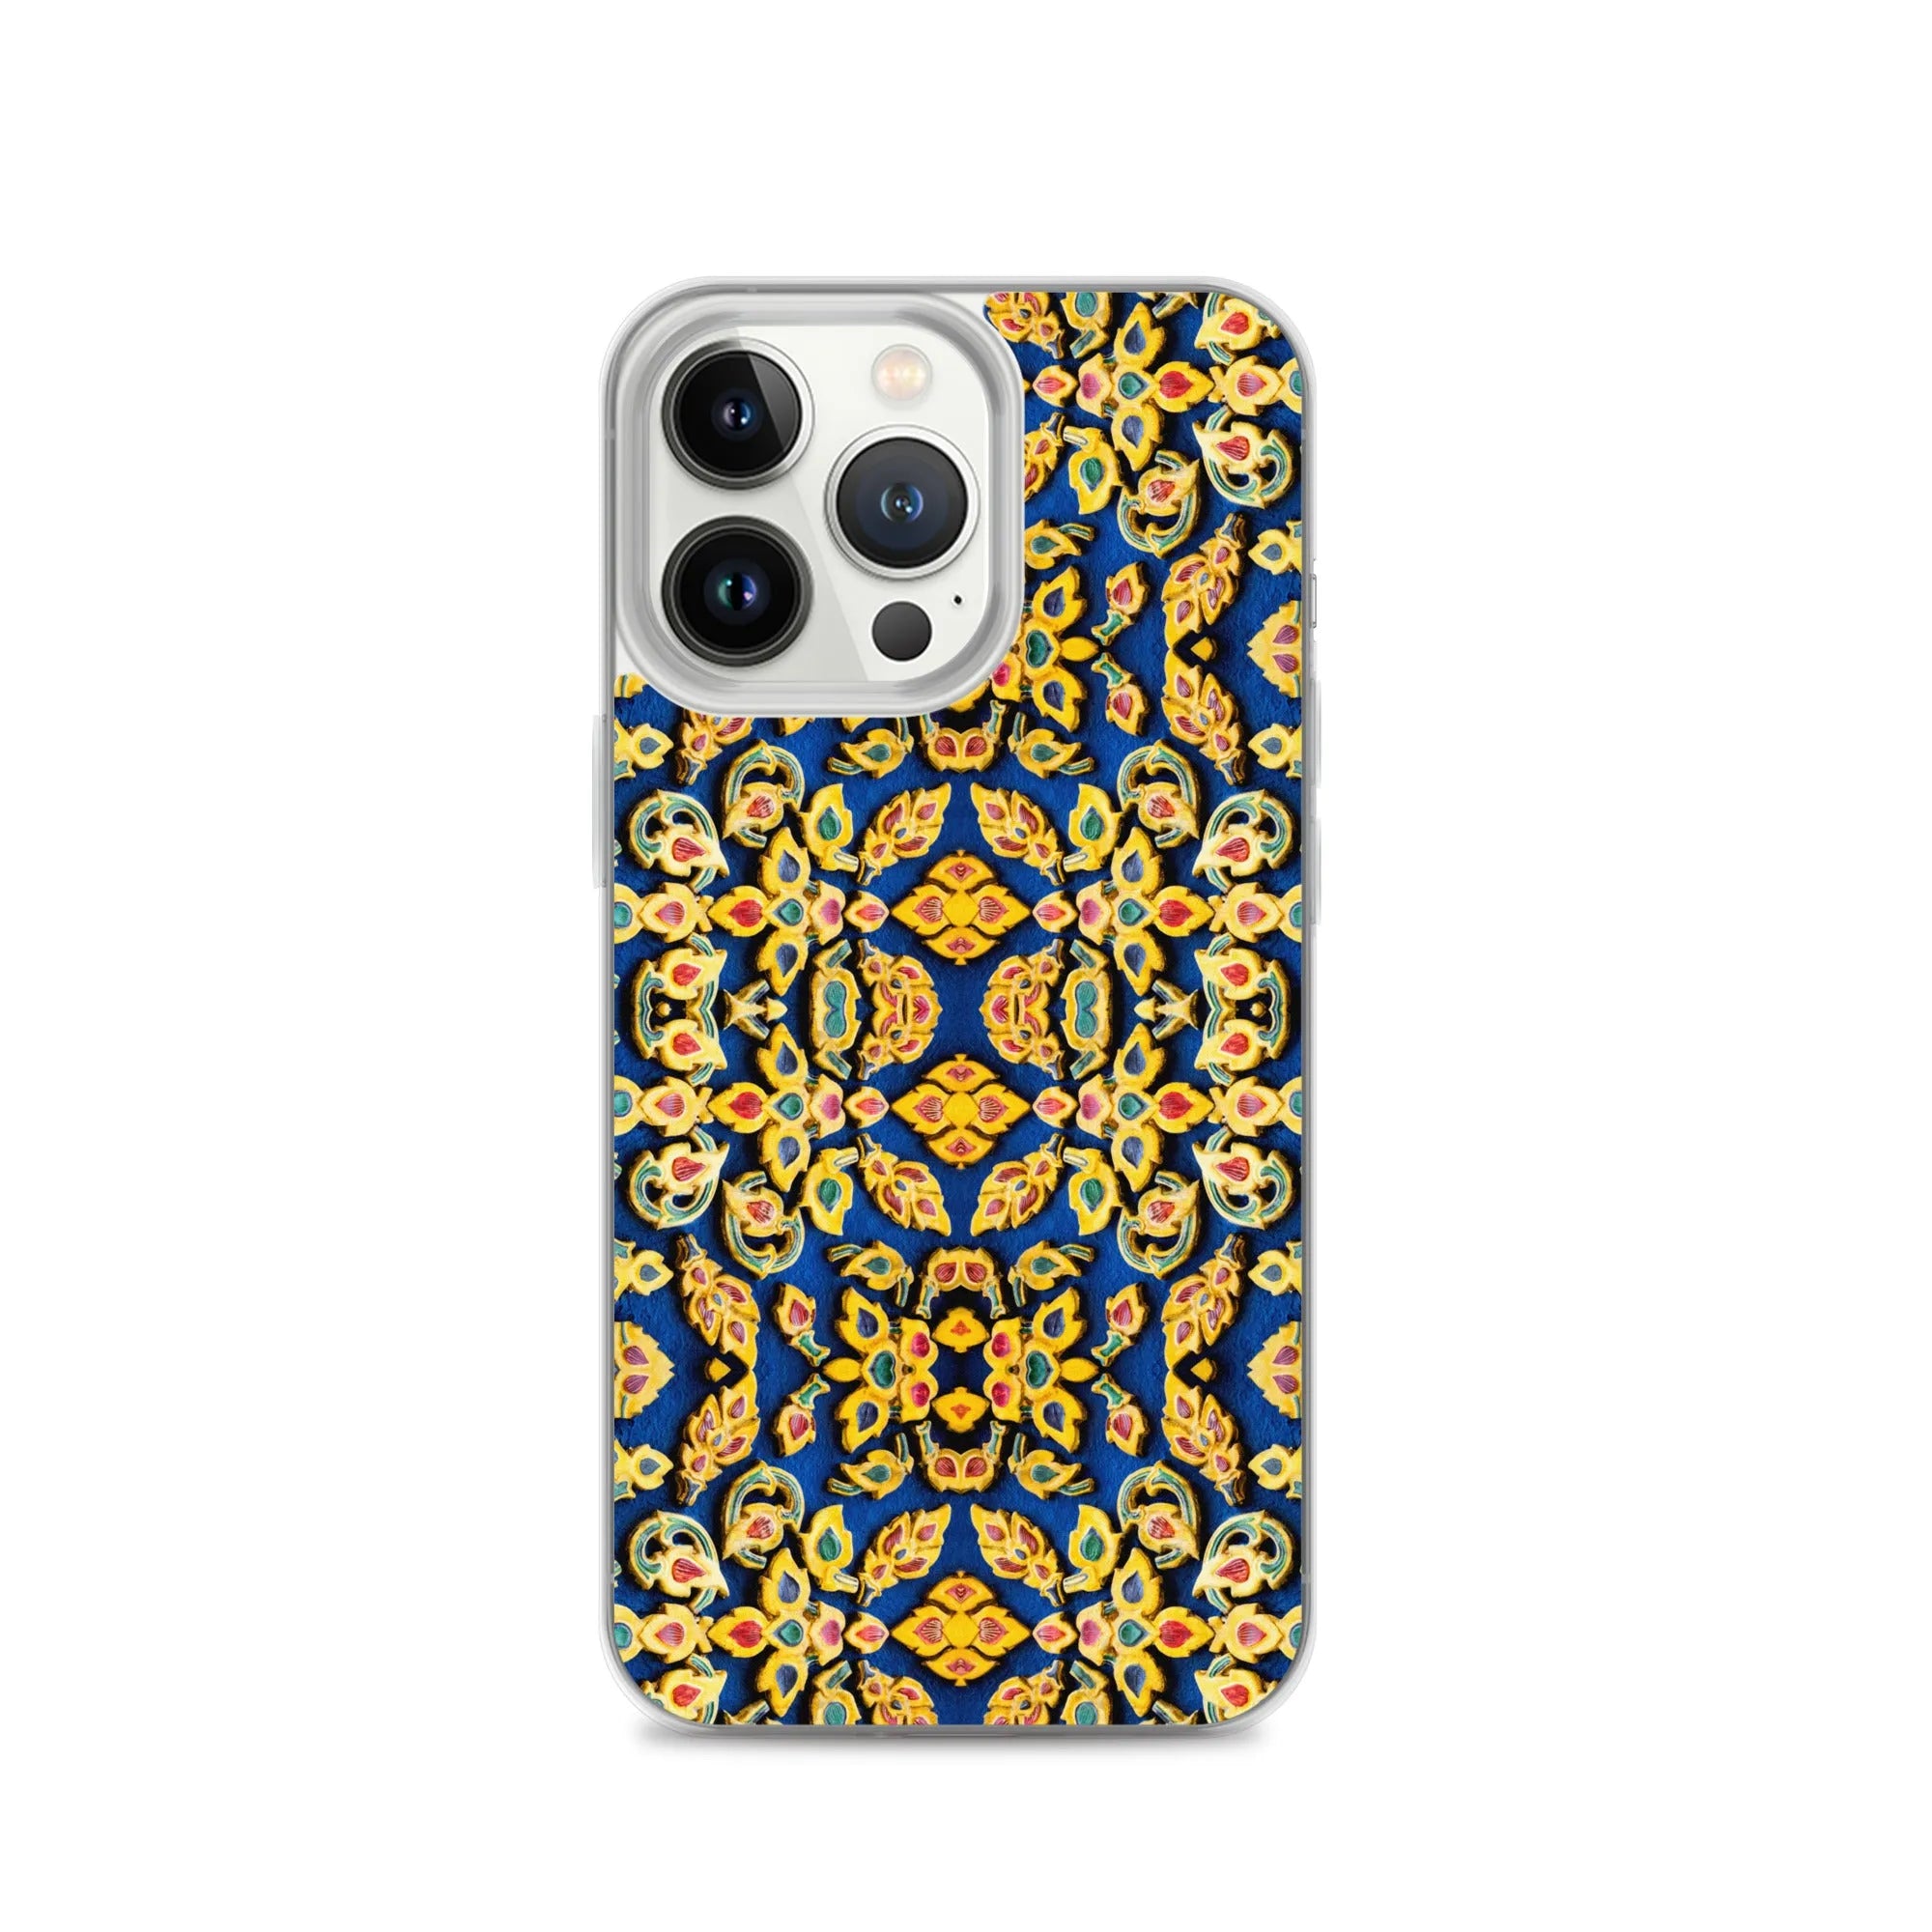 Entering Ayodhya Pattern Iphone Case | Bold Mosaic Pattern Thailand - Iphone 13 Pro - Mobile Phone Cases - Aesthetic Art